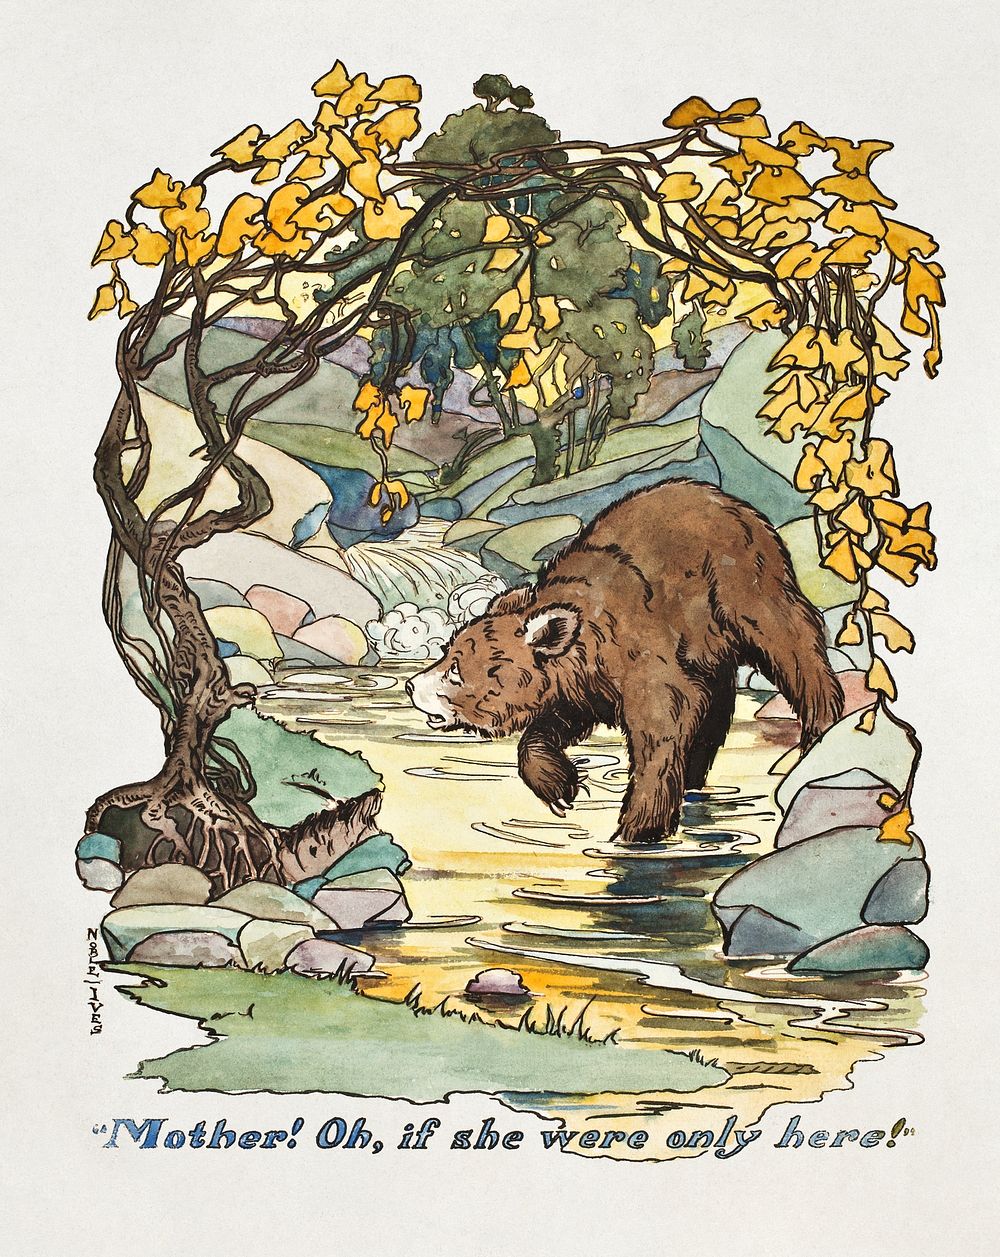 &ldquo;Mother! Oh, if she were only here&rdquo; from The Story of Teddy the Bear (1907) illustrated by Sarah Noble Ives.…